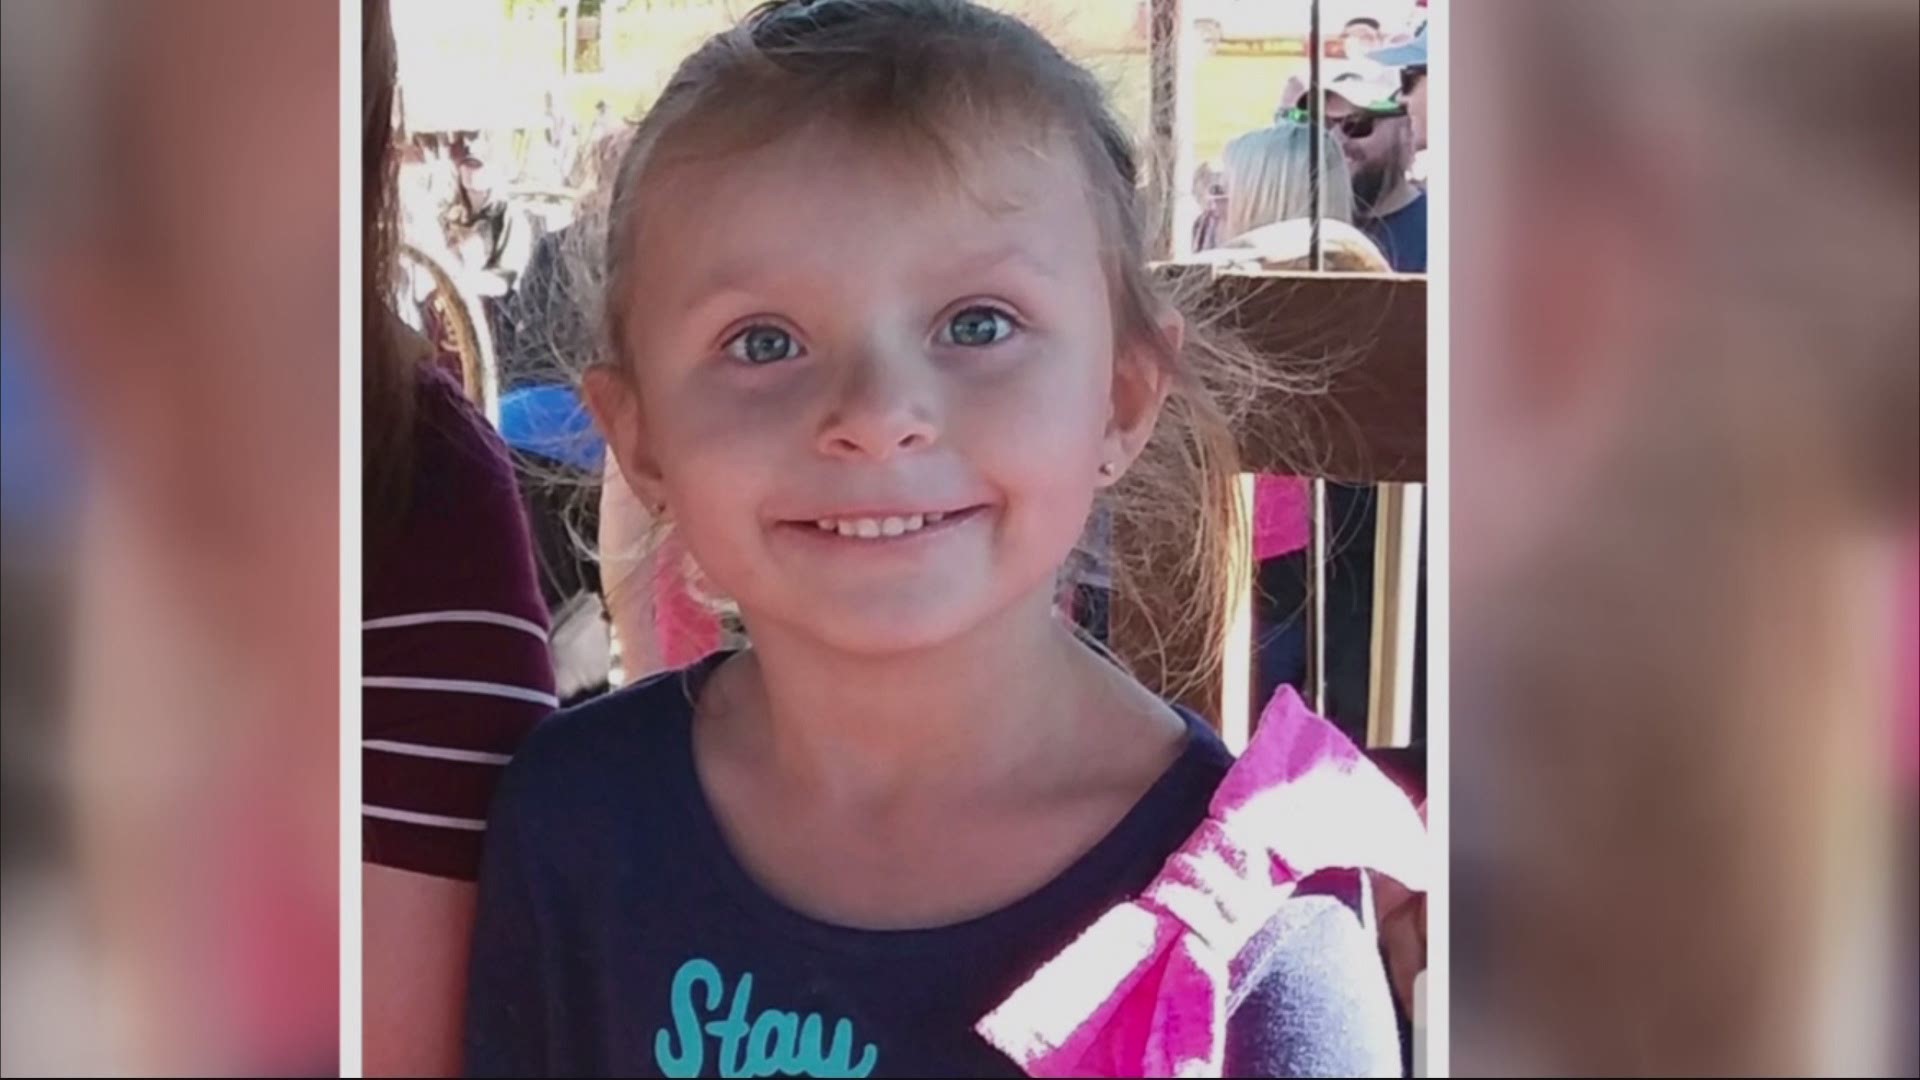 Police in California are looking for a 4-year-old girl taken by her mother during a supervised visit in Vancouver, WA.